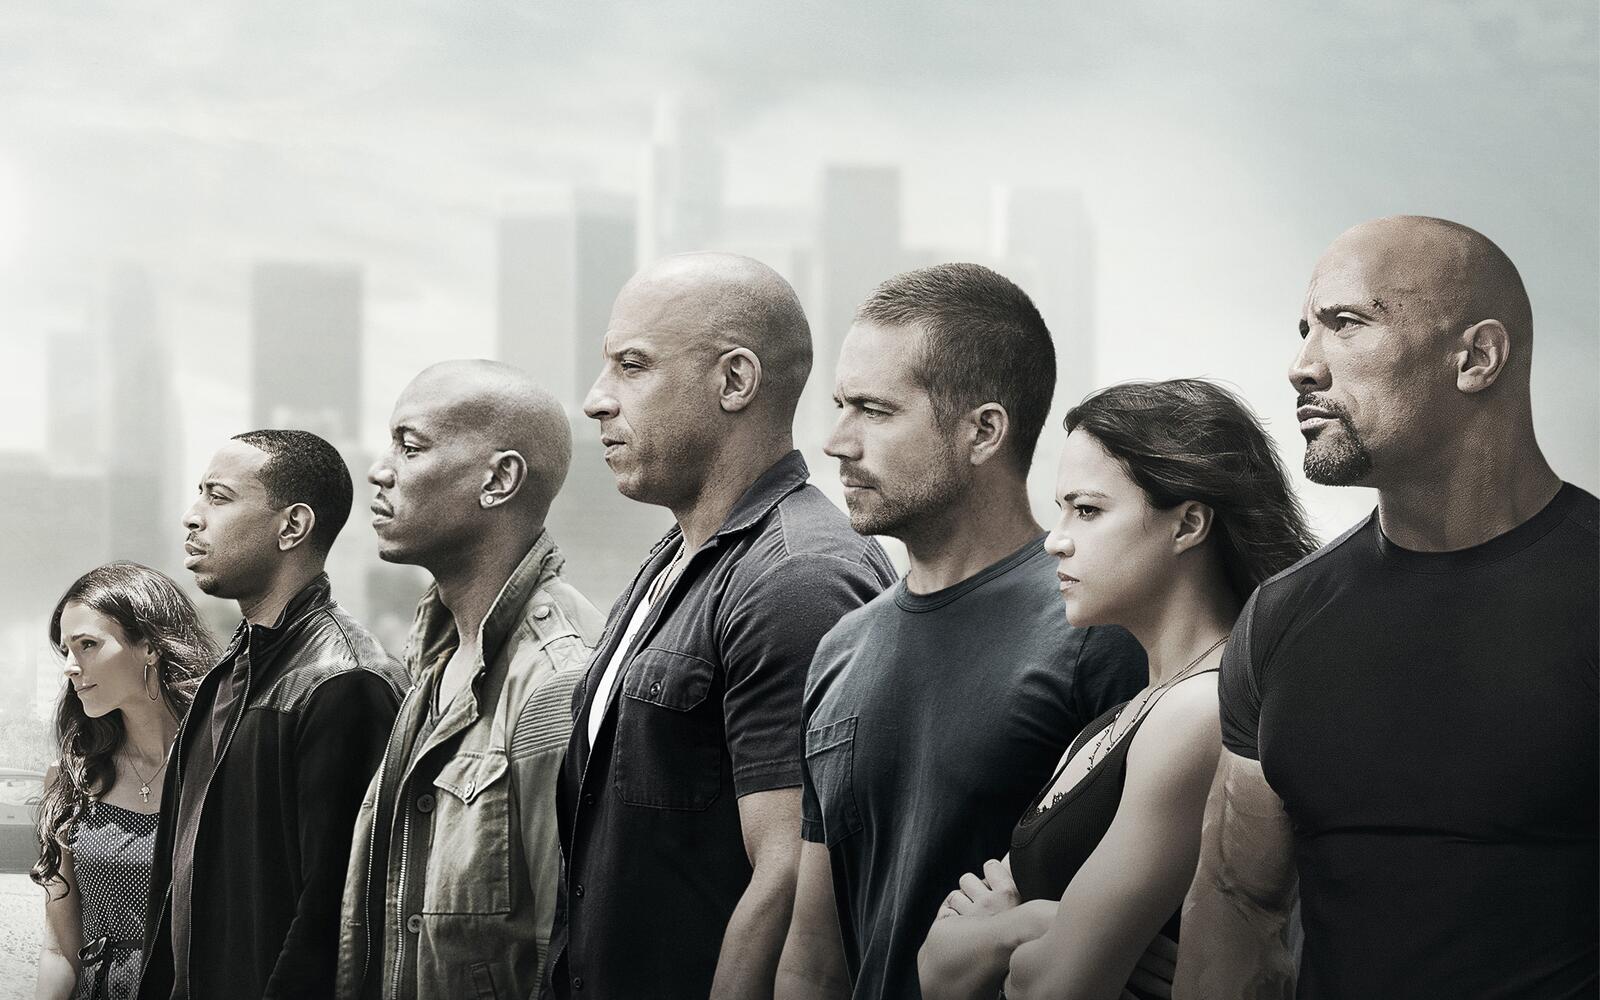 Wallpapers fast and furious movies actors on the desktop